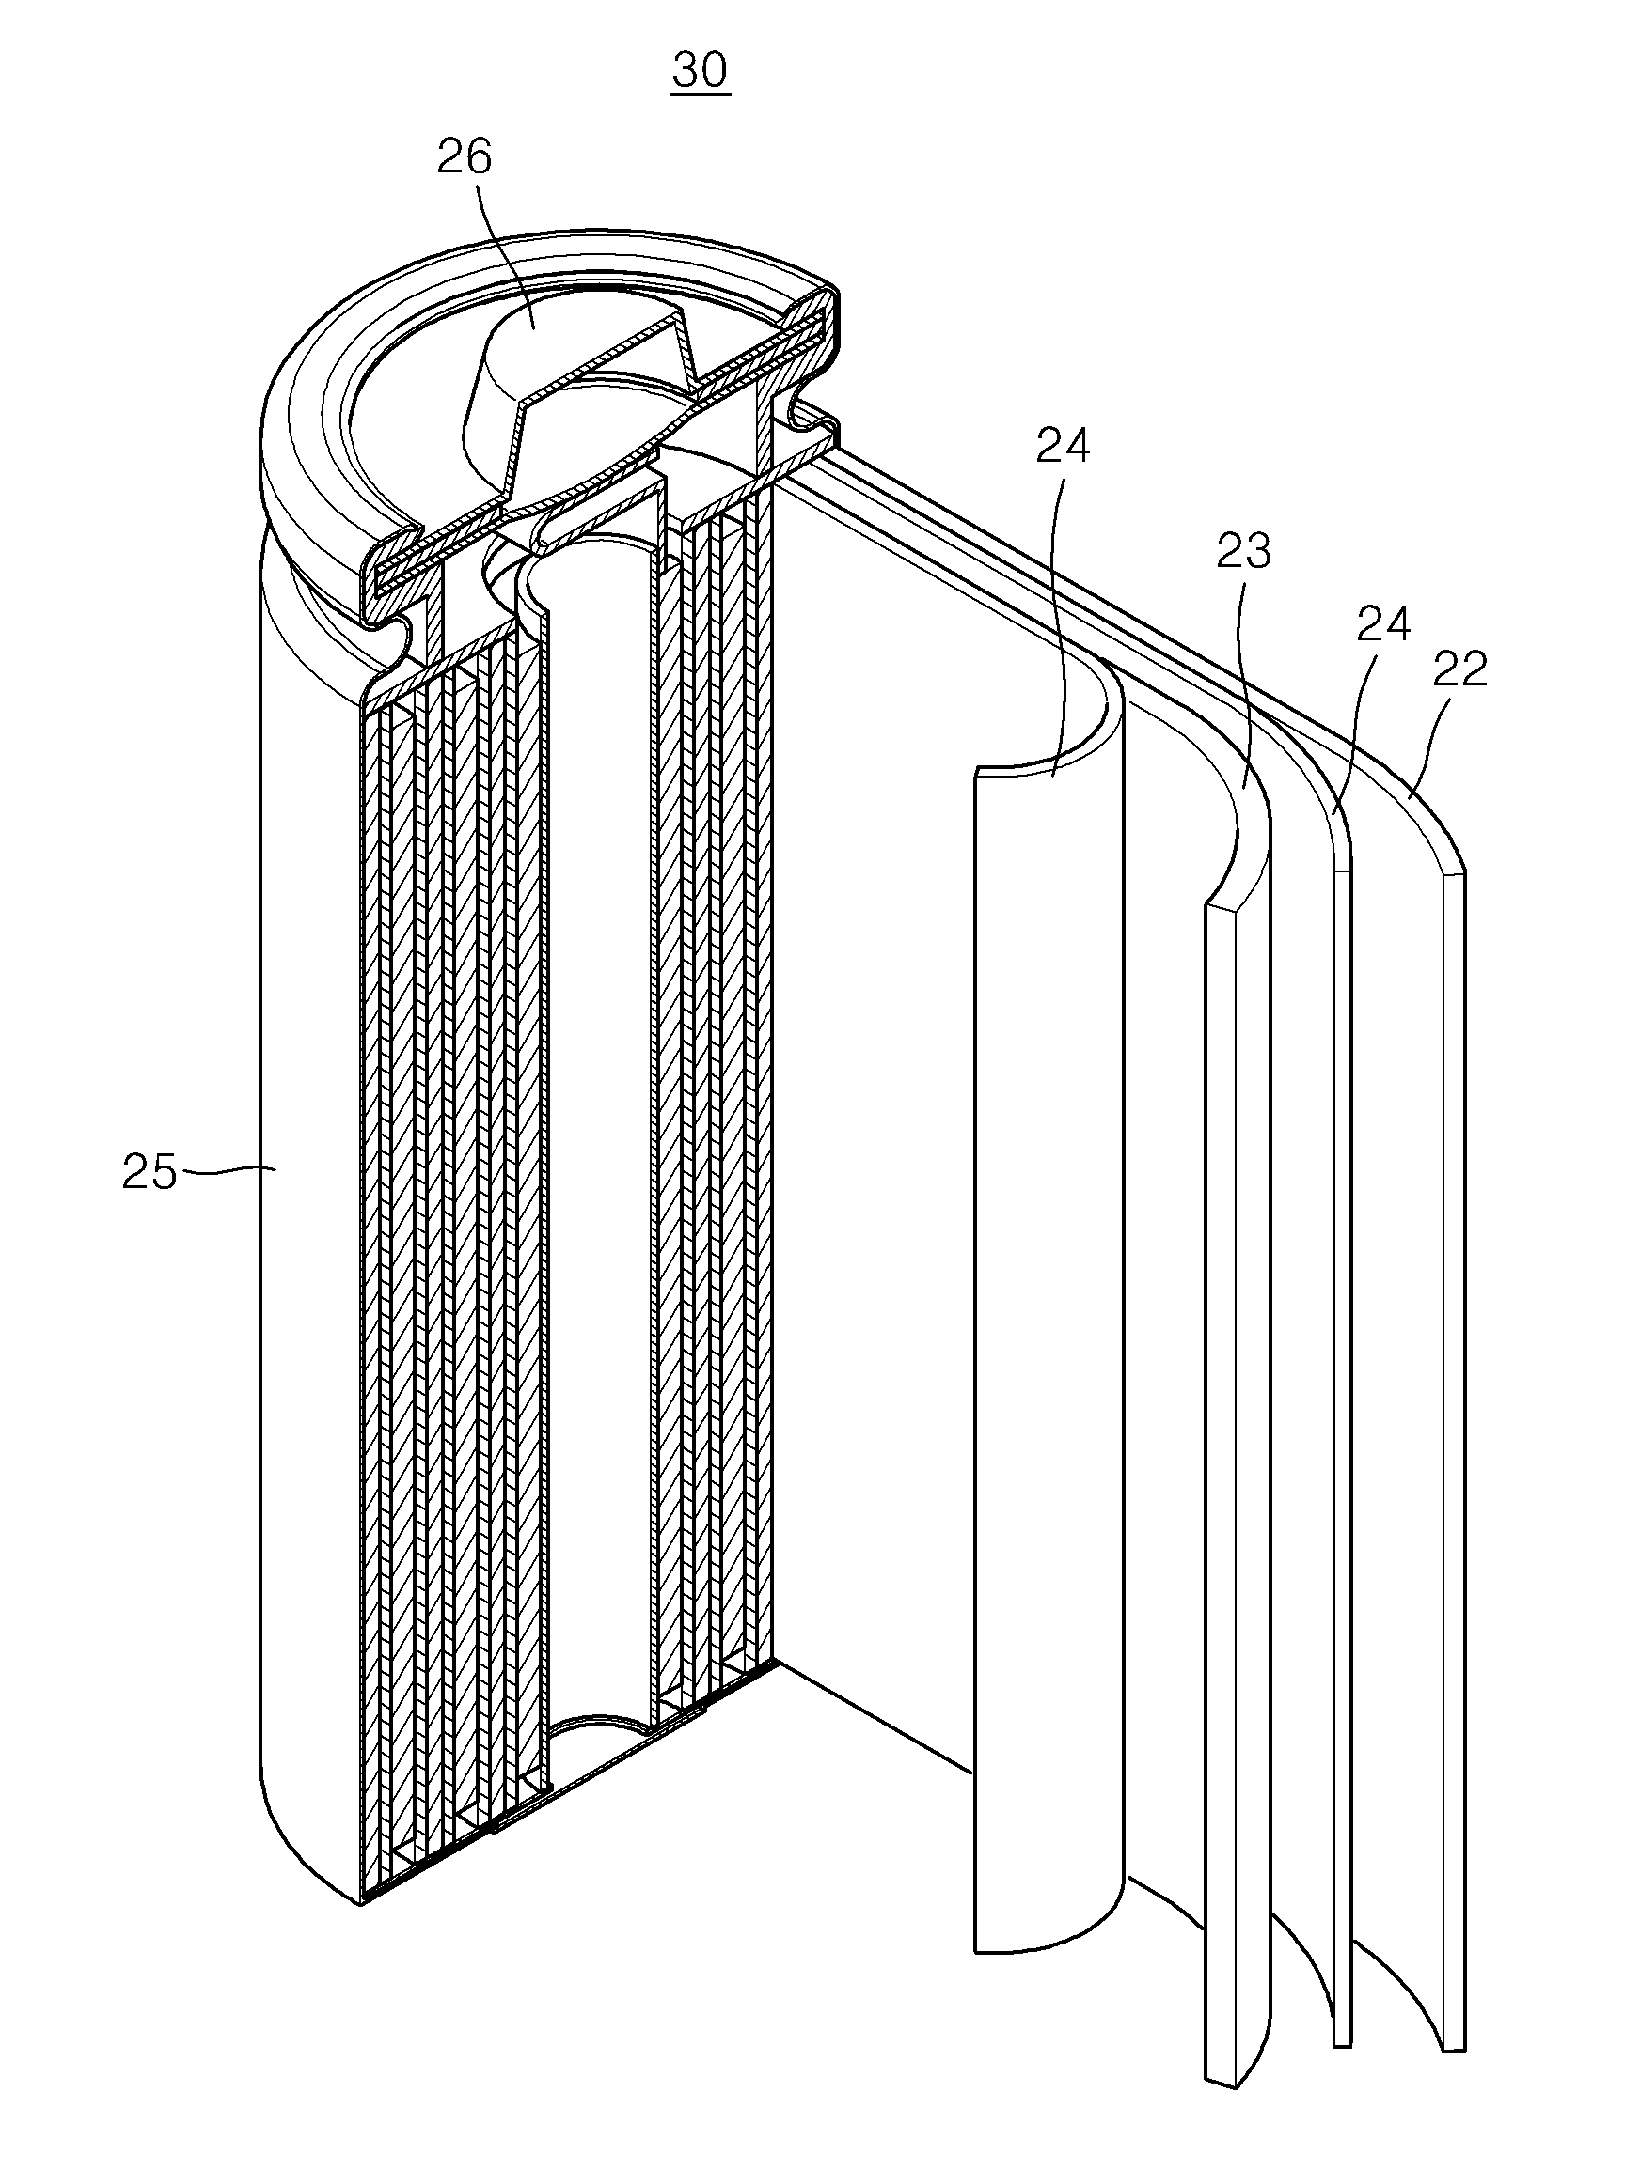 Negative active material, method of preparing the same, and lithum battery including negative active material